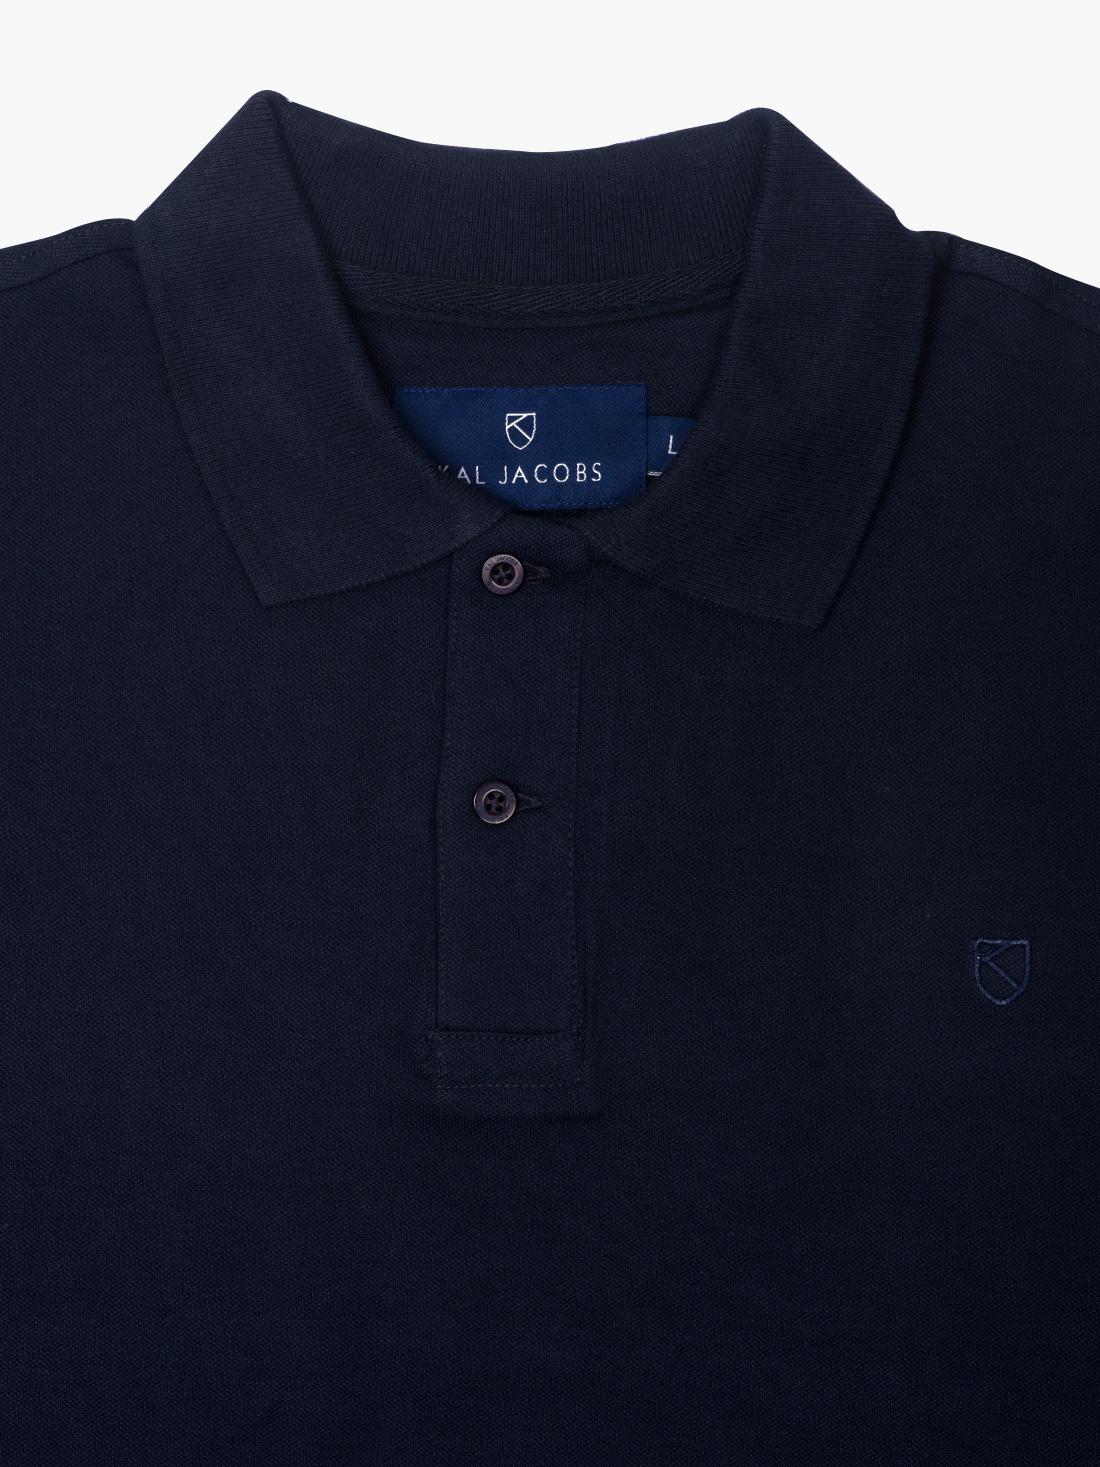 Kal Jacobs Classic Fit Midnight Navy Polo Shirt